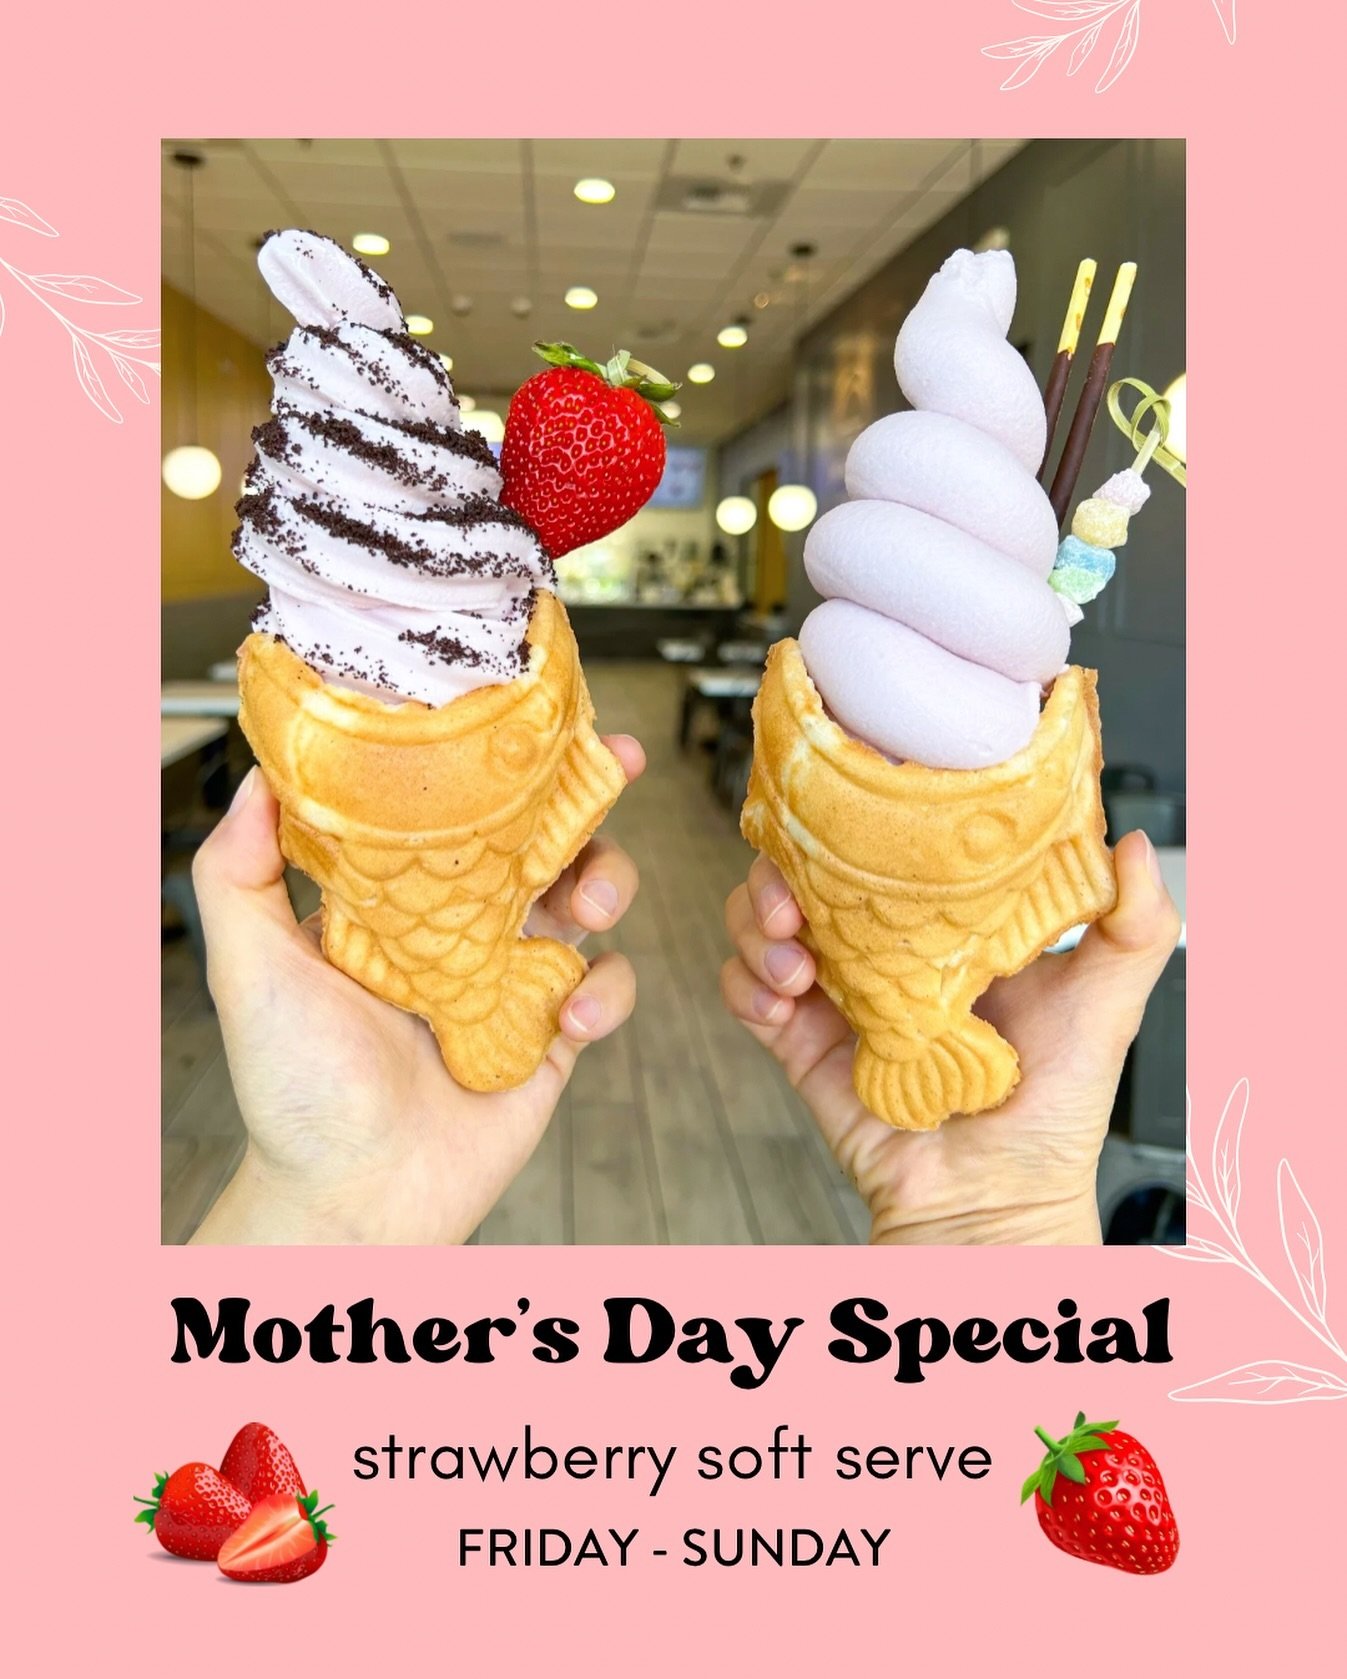 Celebrating all moms this weekend with our limited time STRAWBERRY SOFT SERVE! 🍓🍓 Available at all AZ and CA locations this Friday to Sunday! 

Stay sweet and cool with the special lady in your life this weekend at Snowtime ✨